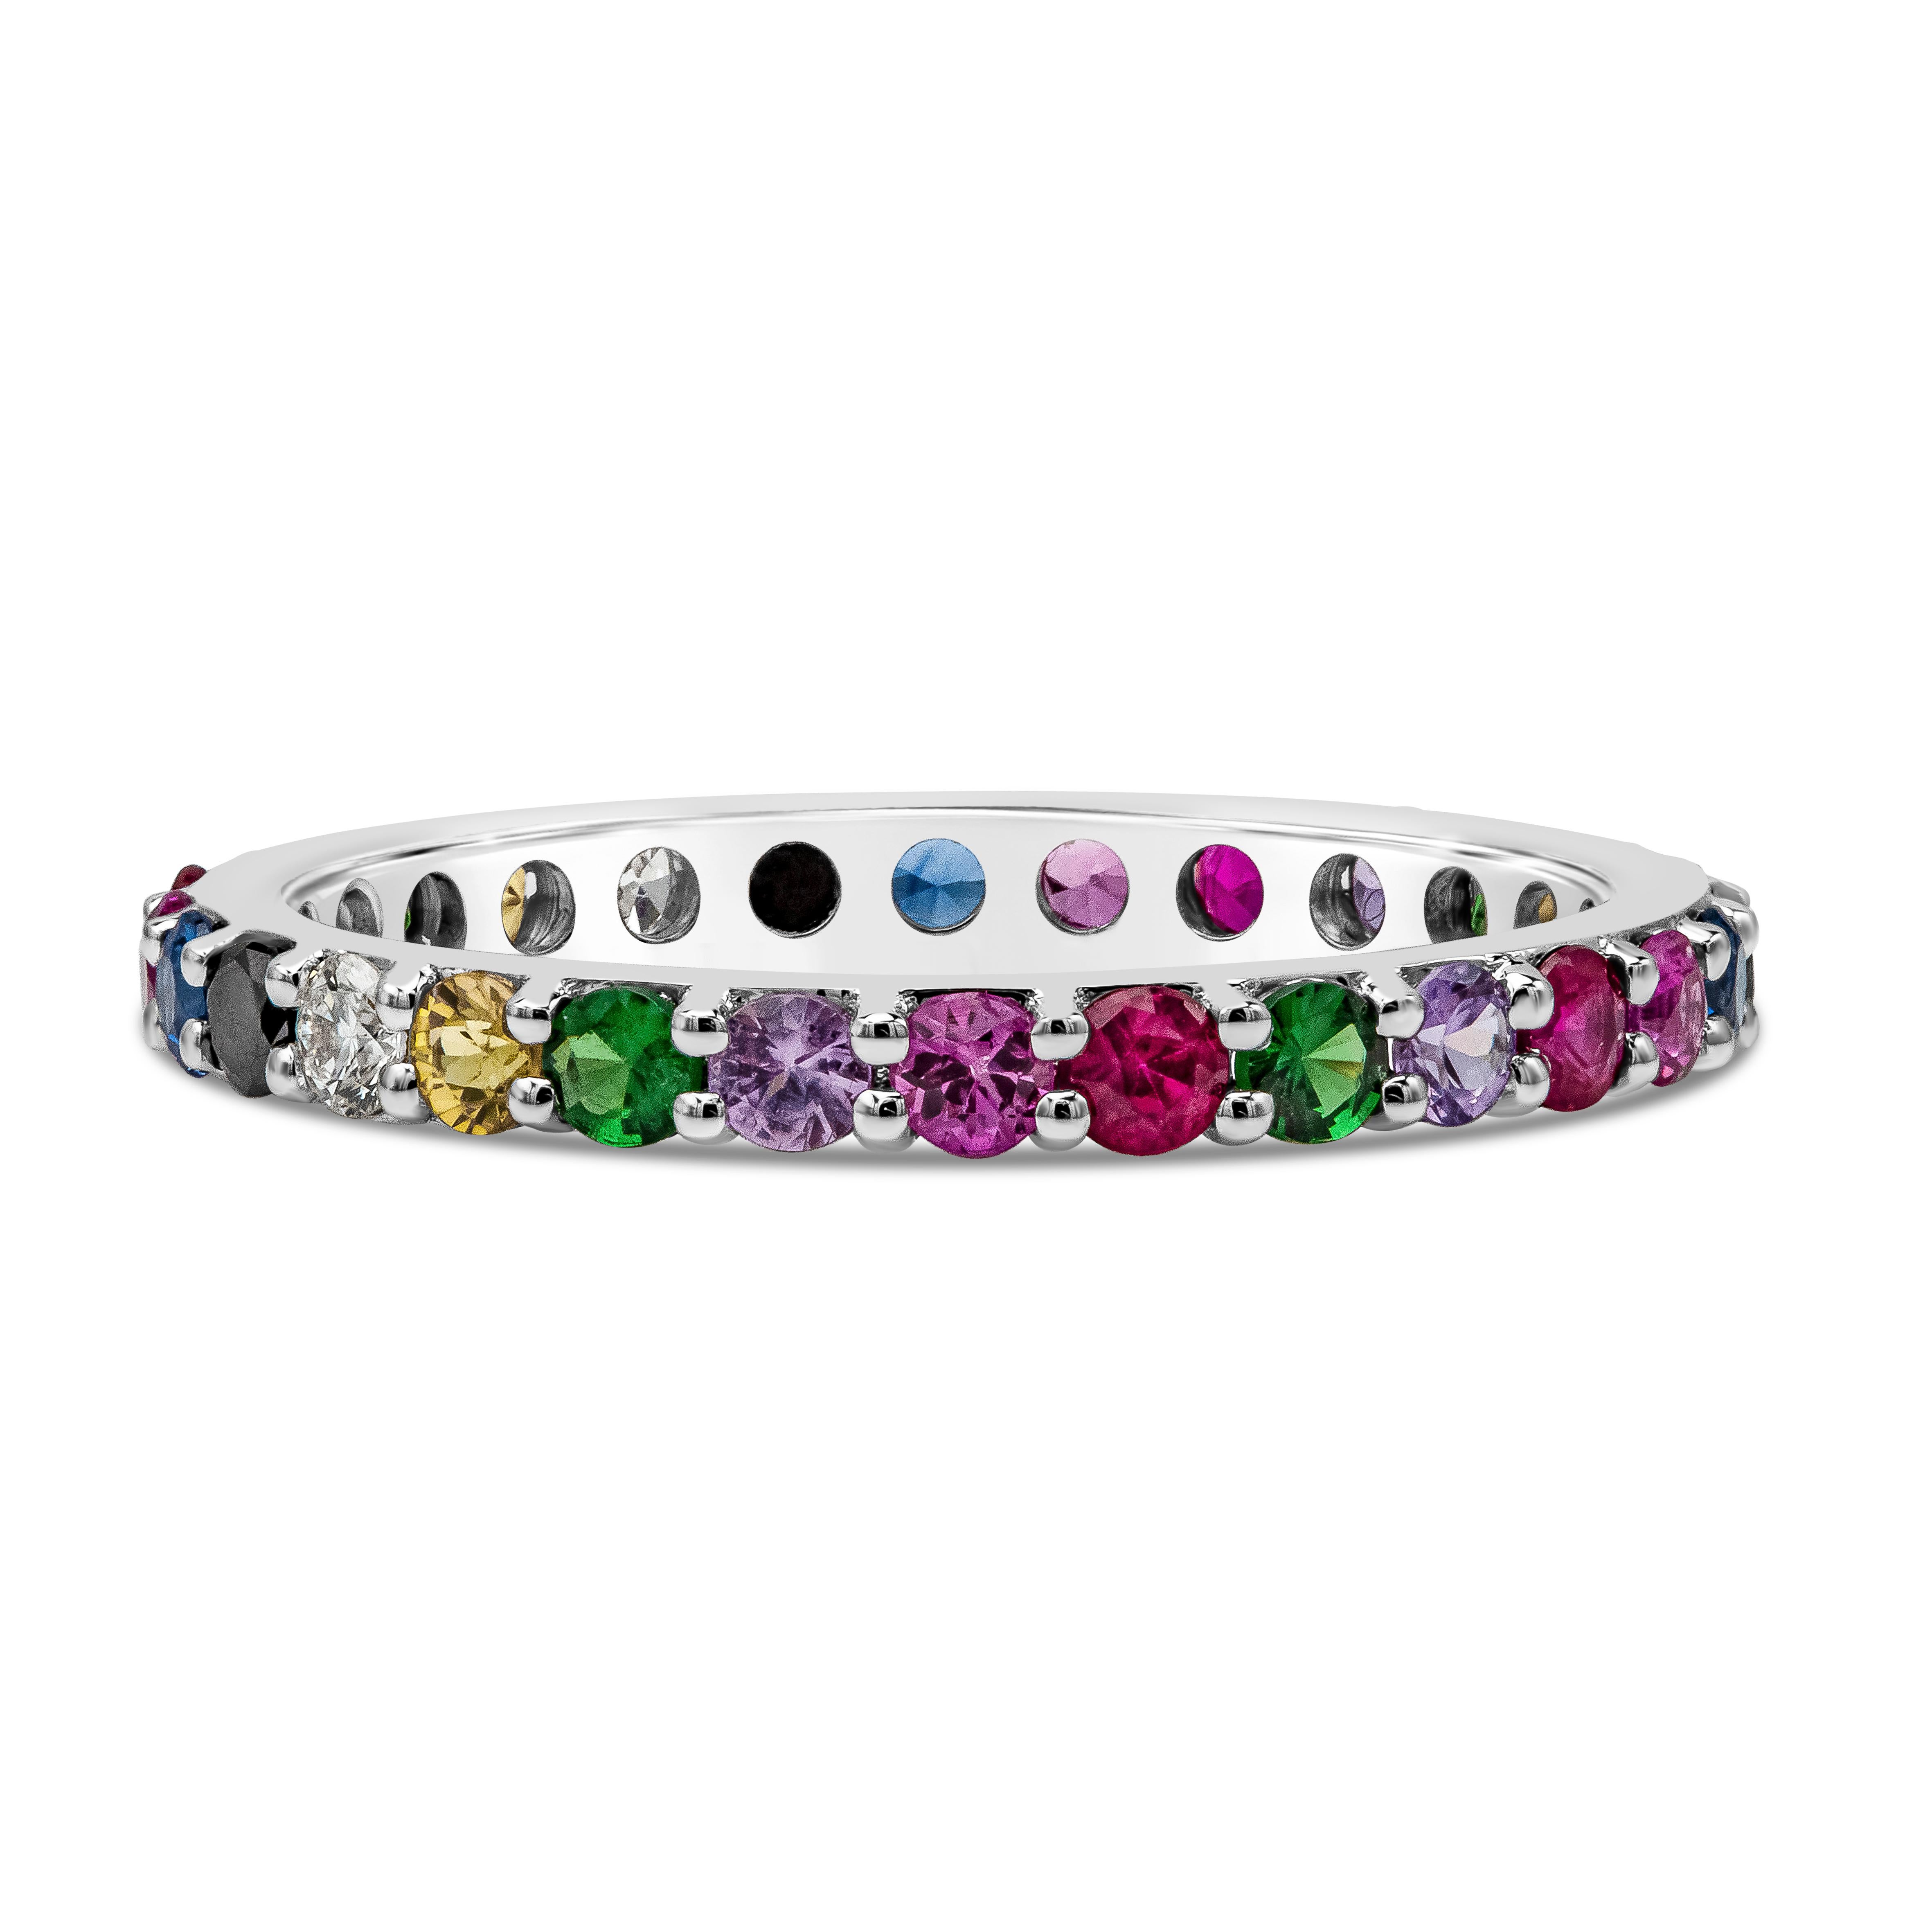 A fashionable eternity wedding band, showcasing a unique ring with different color gemstones and diamonds weighing 1.23 carats total. Set in a scalloped-pave style of 18K white gold. Size 6.5 US, resizable upon request.

Roman Malakov is a custom